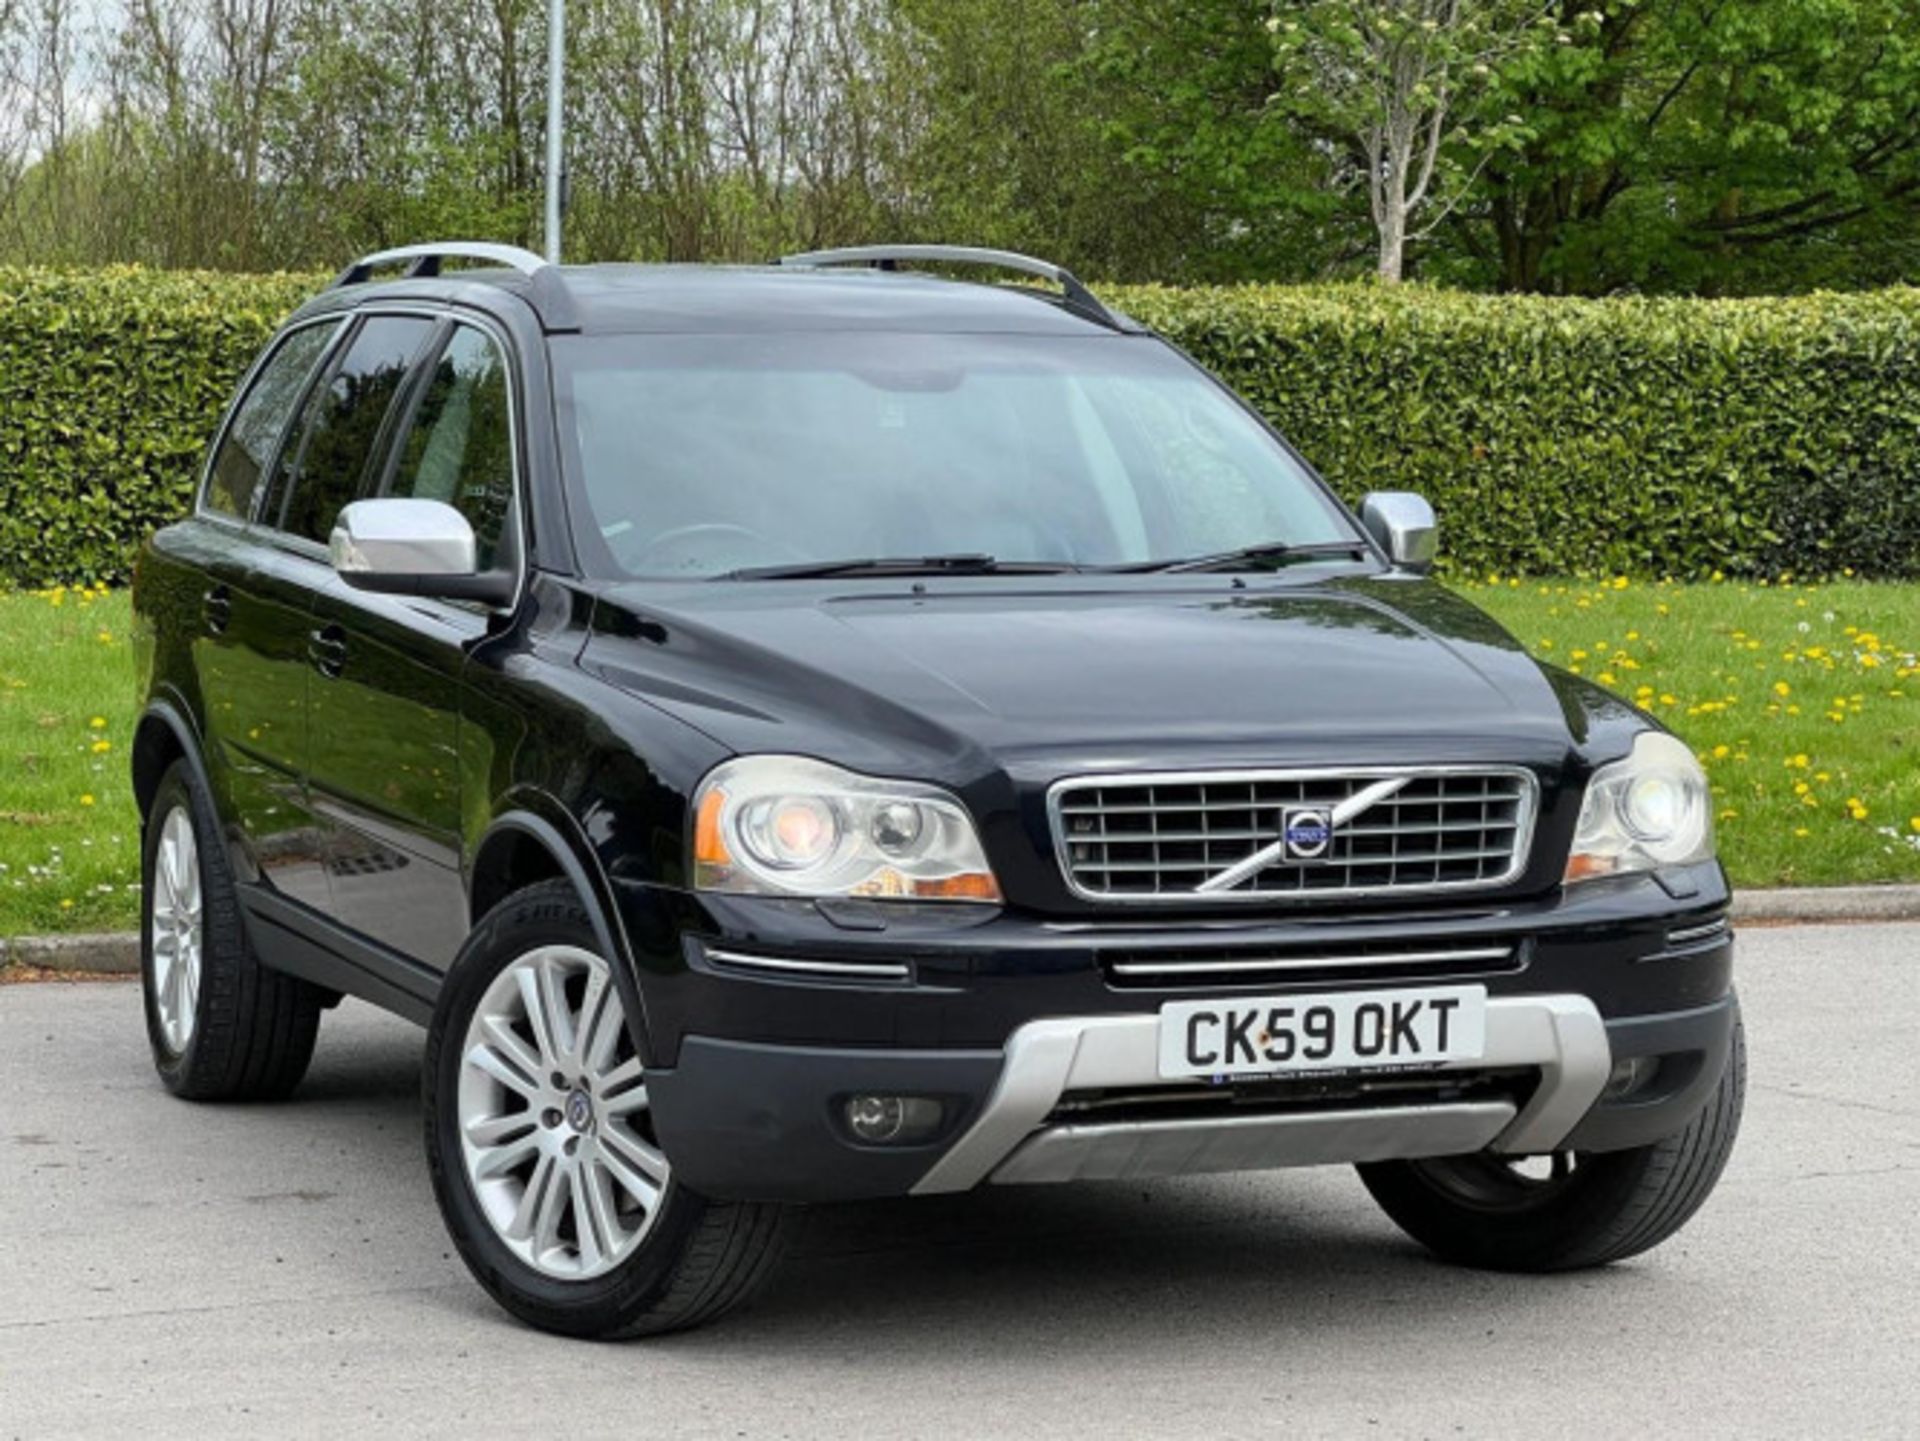 VOLVO XC90 2.4 D5 EXECUTIVE GEARTRONIC AWD, 5DR >>--NO VAT ON HAMMER--<< - Image 11 of 136